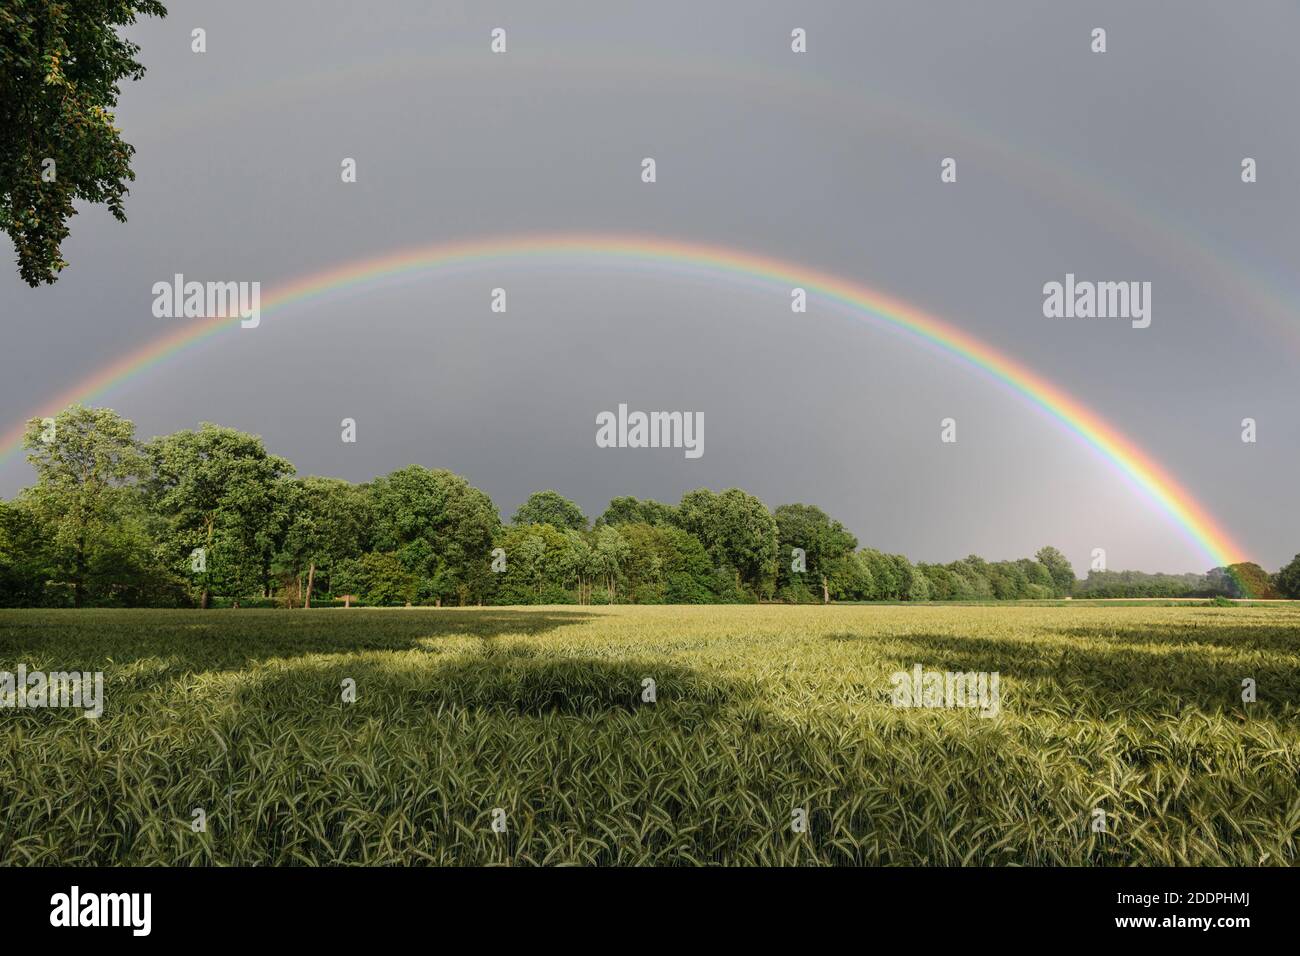 double rainbow over a grain field, Germany, Lower Saxony, Oldenburger Muensterland Stock Photo